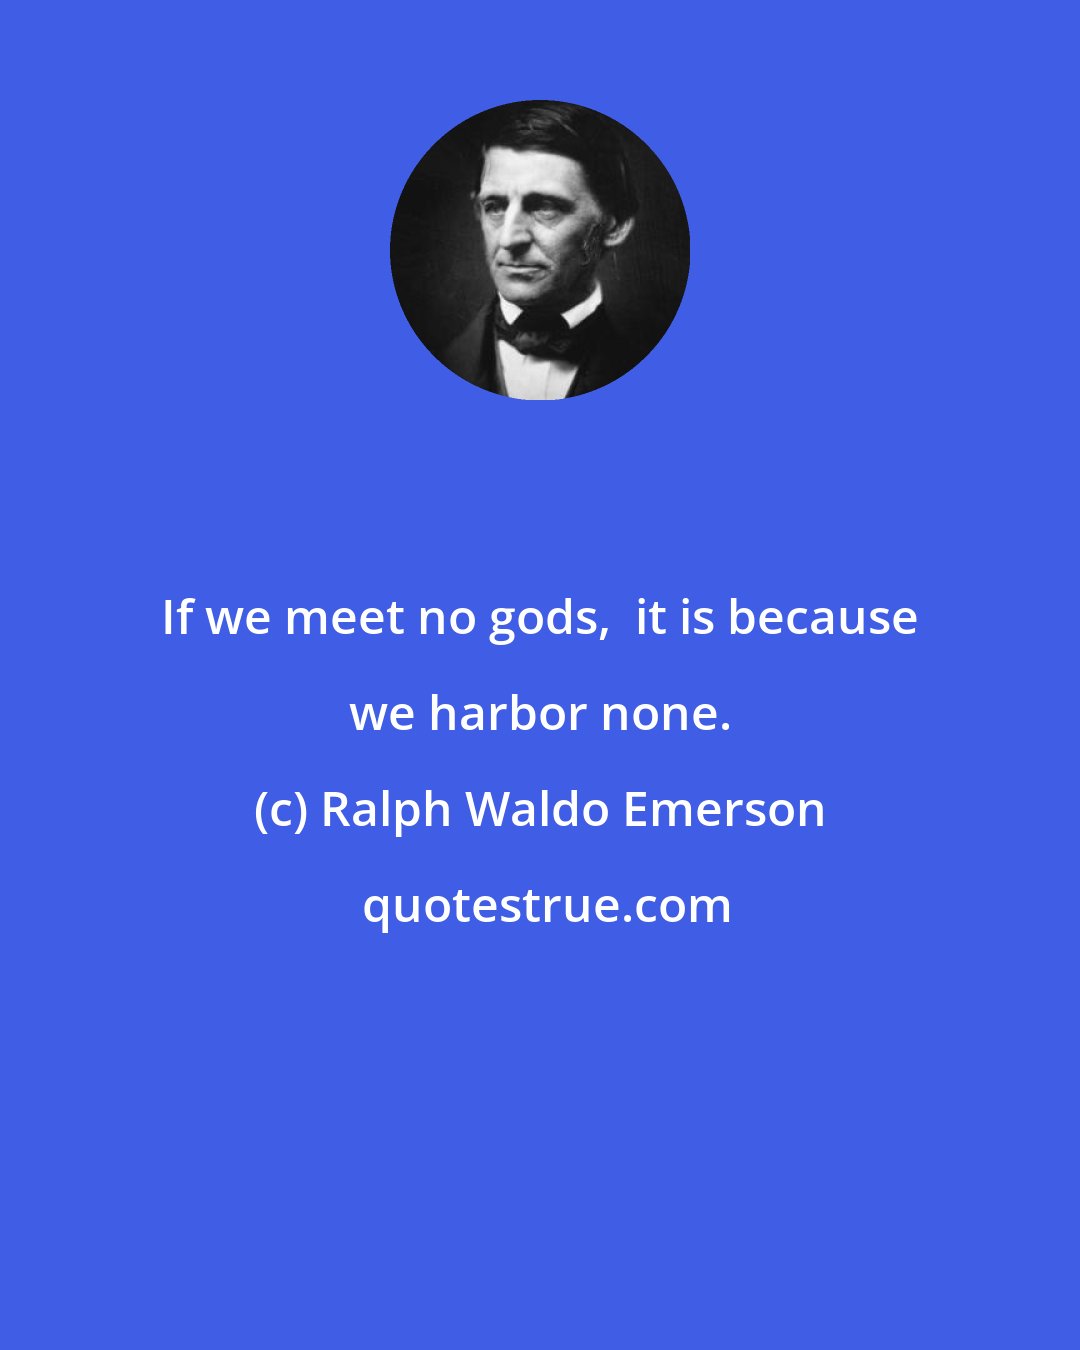 Ralph Waldo Emerson: If we meet no gods,  it is because we harbor none.